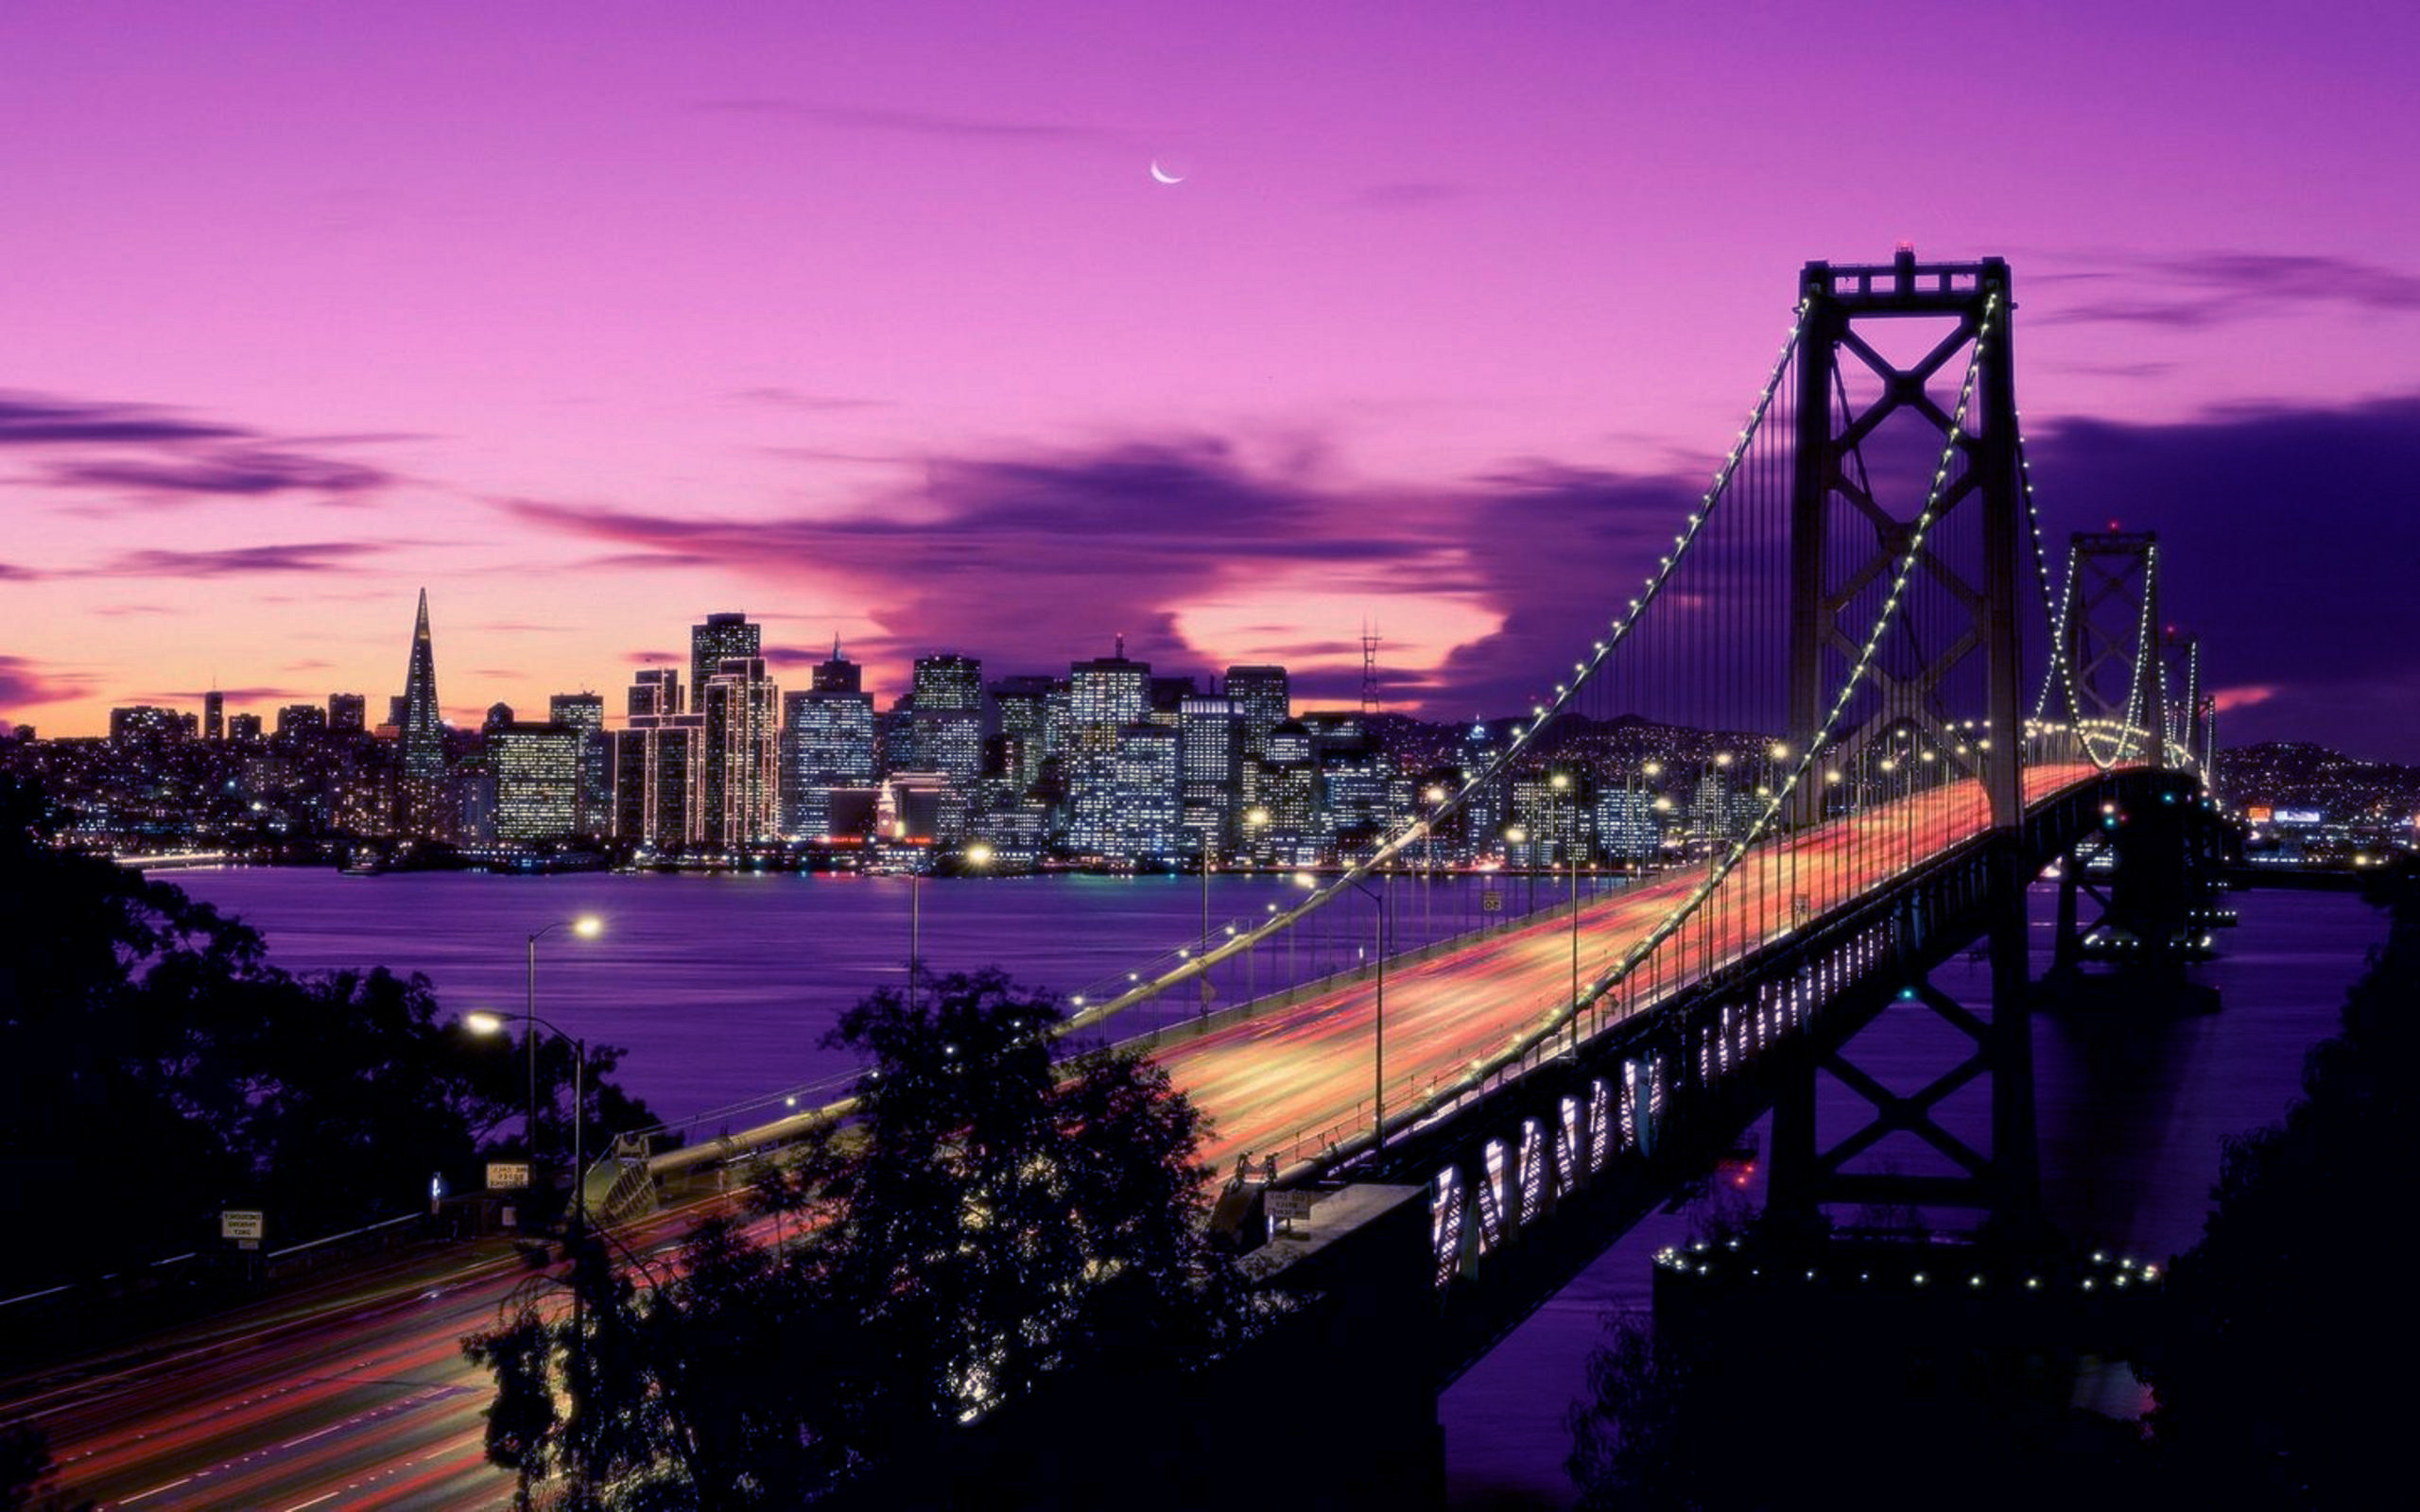 San Francisco: Founded in 1776 as part of Spain’s mission to convert the area’s Native American inhabitants to Catholicism. 2560x1600 HD Wallpaper.